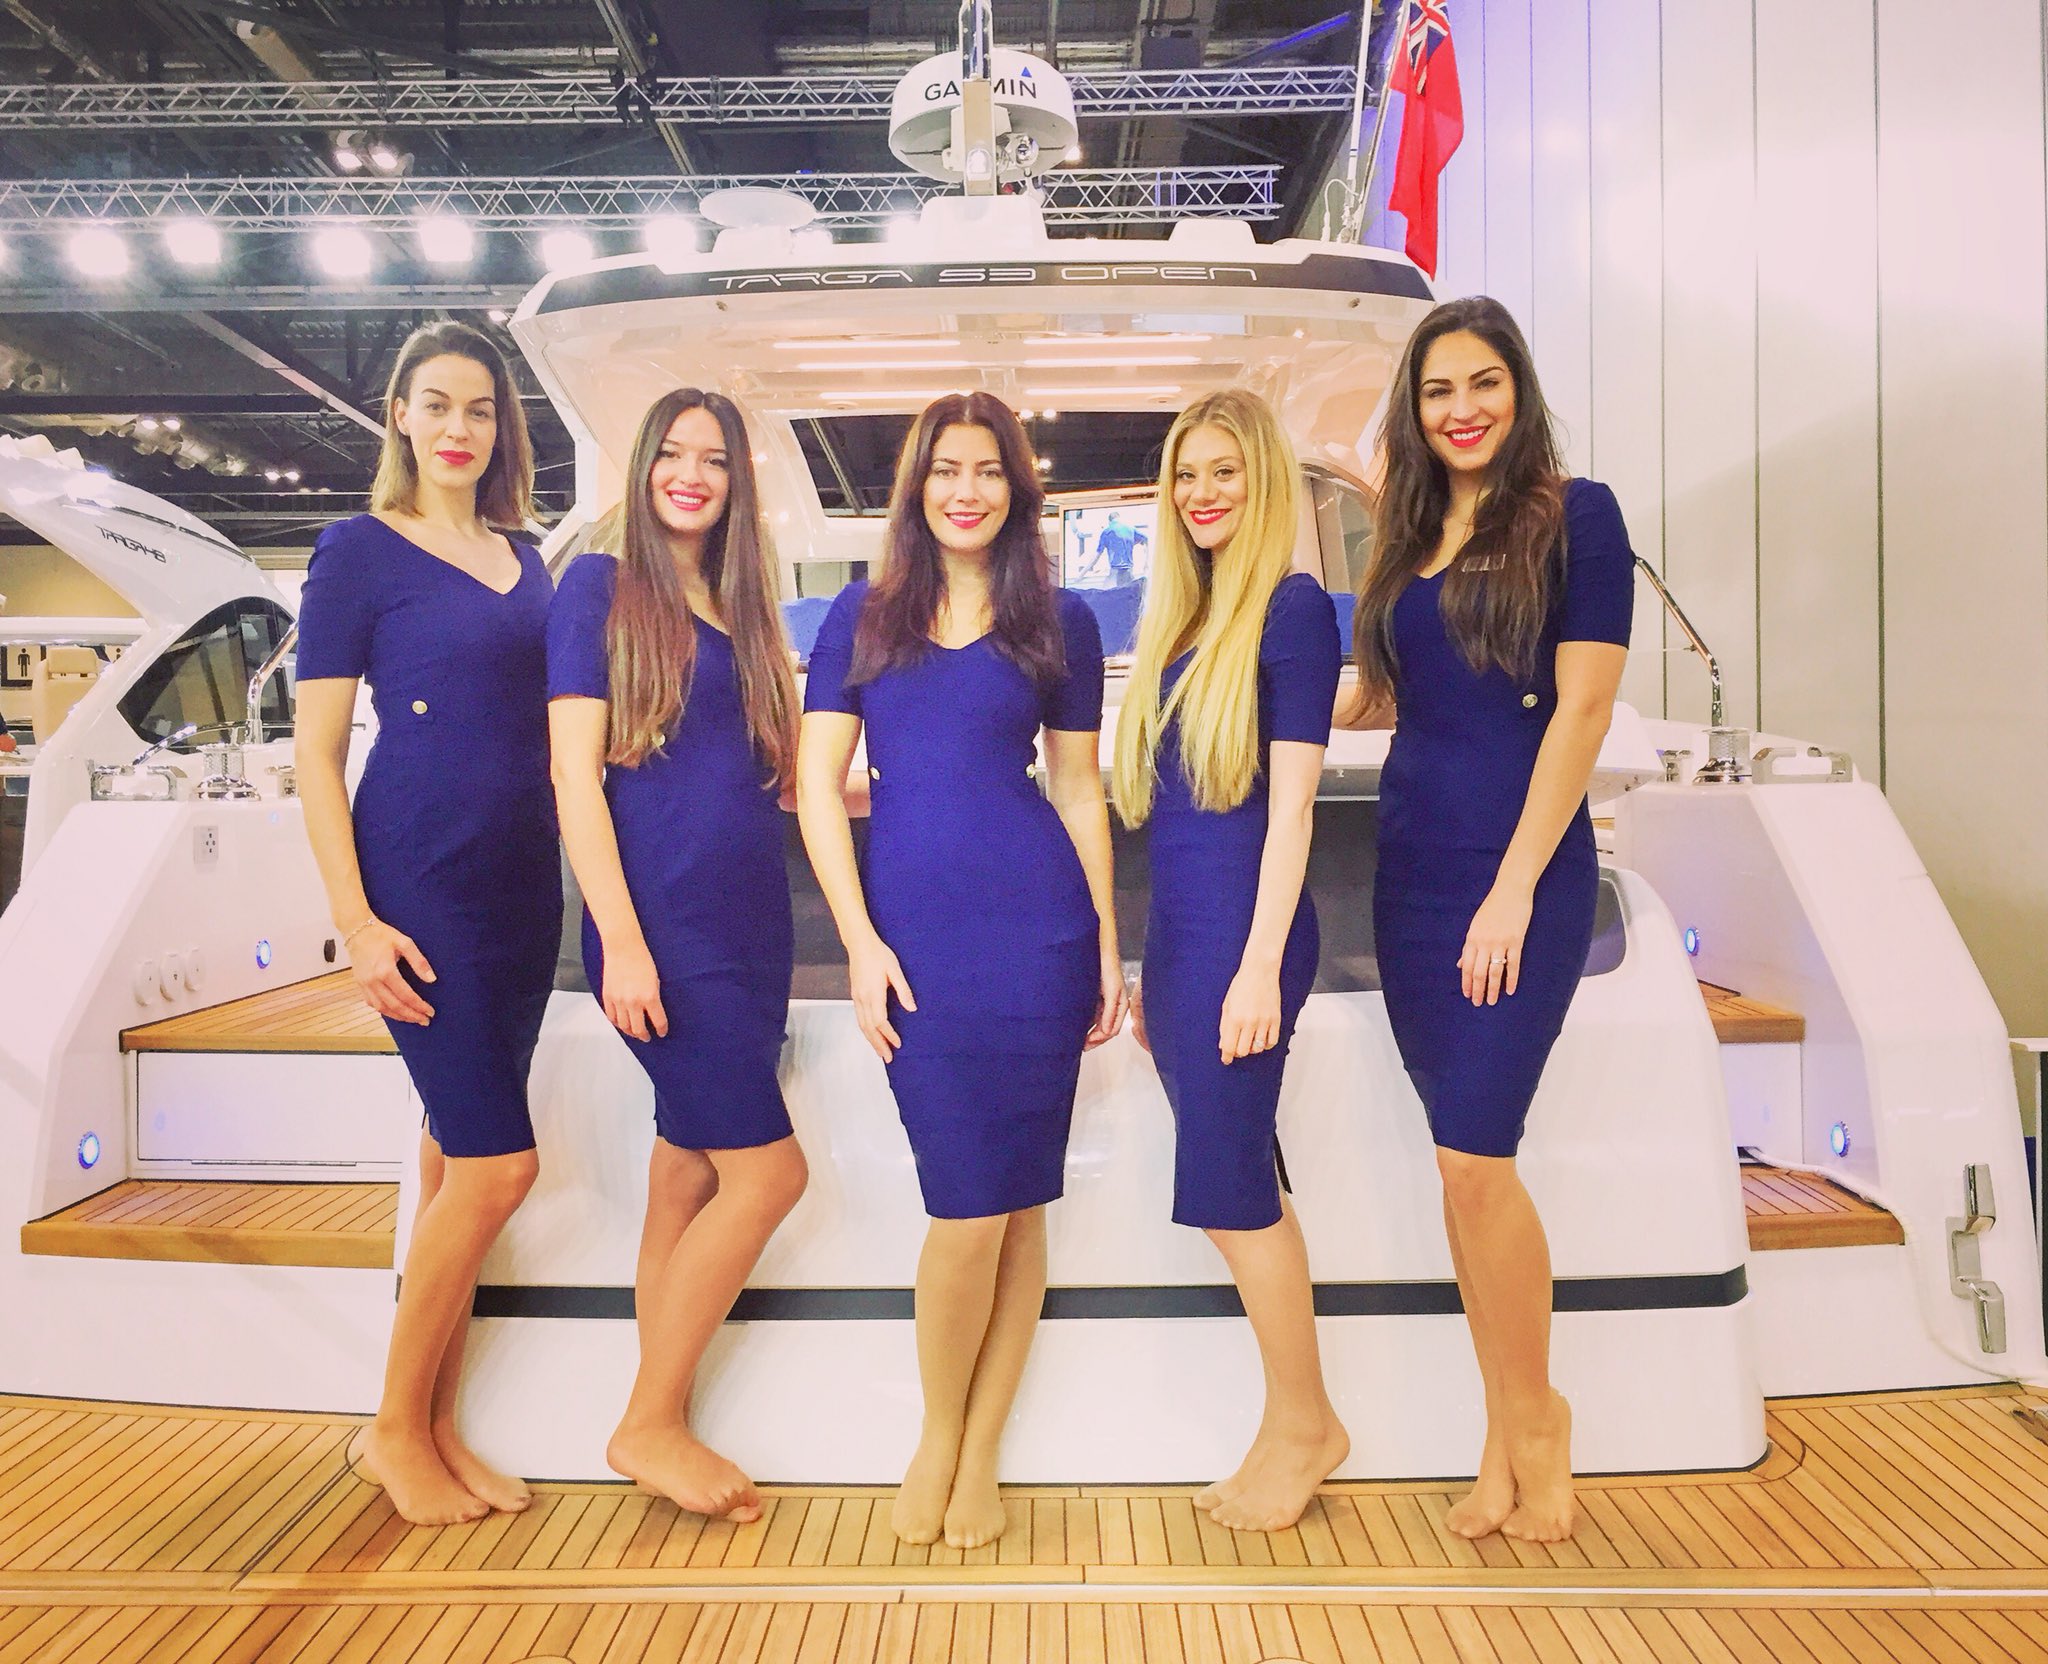 “Our Fairline Yachts Boatshow Hostesses are all smiles @ the London Boat Sh...